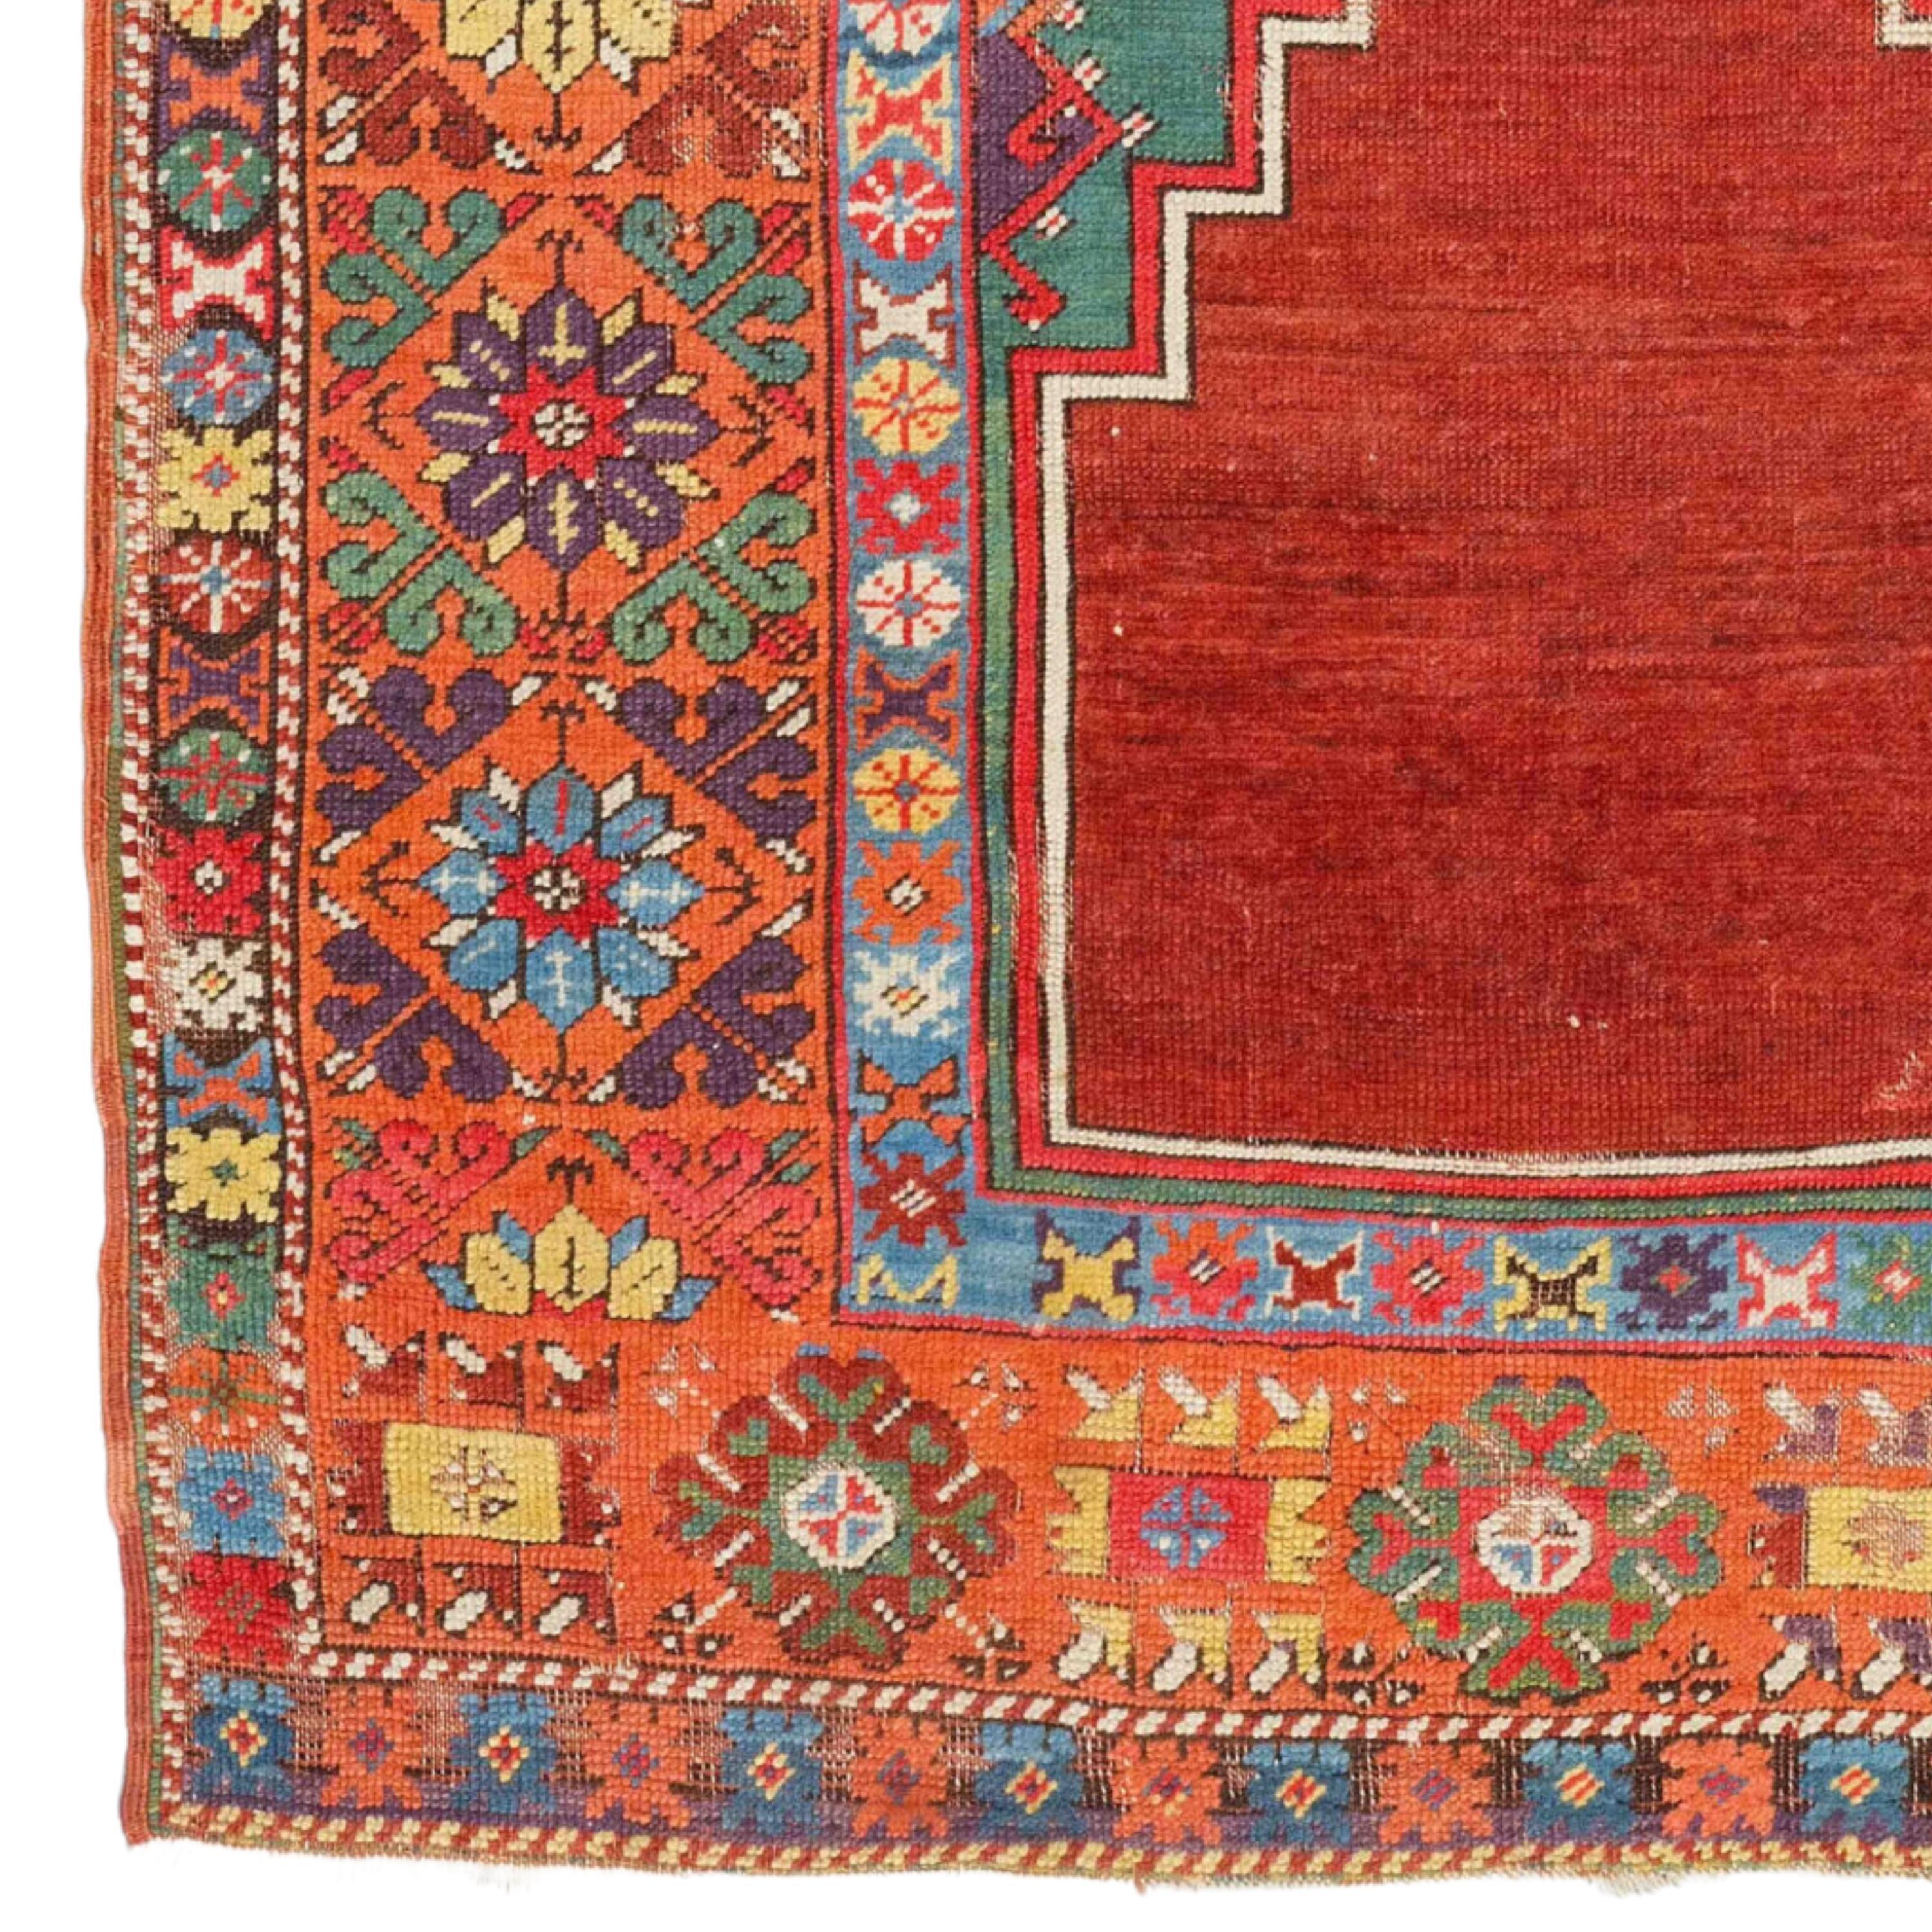 19th Century Anatolian Konya Ladik Rug Size 115 x 165 cm (3,77 x 5,41 ft)

More recently rugs from the region have used design motifs widely distributed throughout the country. Notable is a type of prayer rug with columns and arches that seems